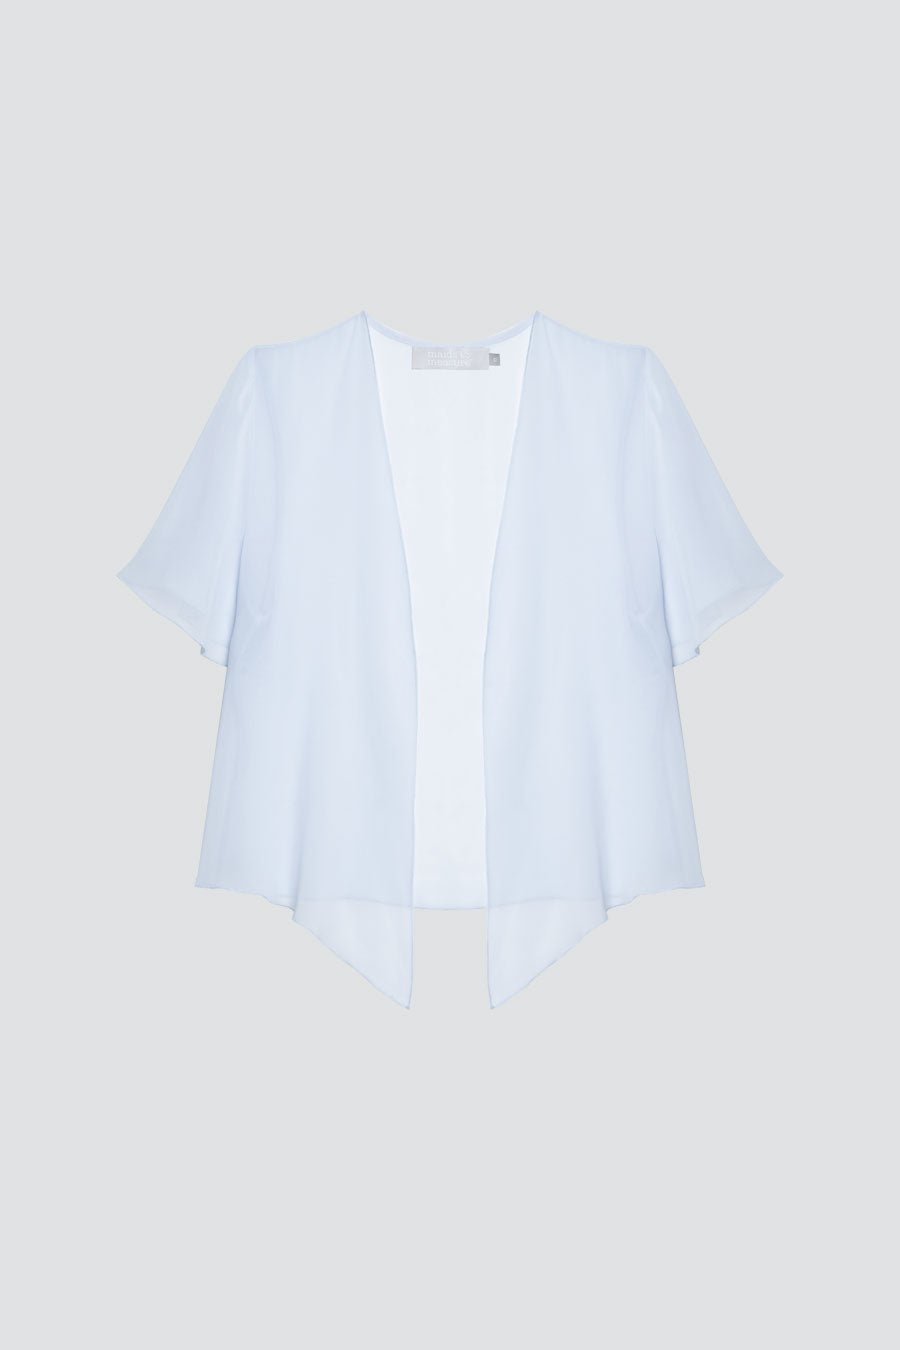 Short Sleeve Chiffon Cover Up - Cloud - Maids to Measure